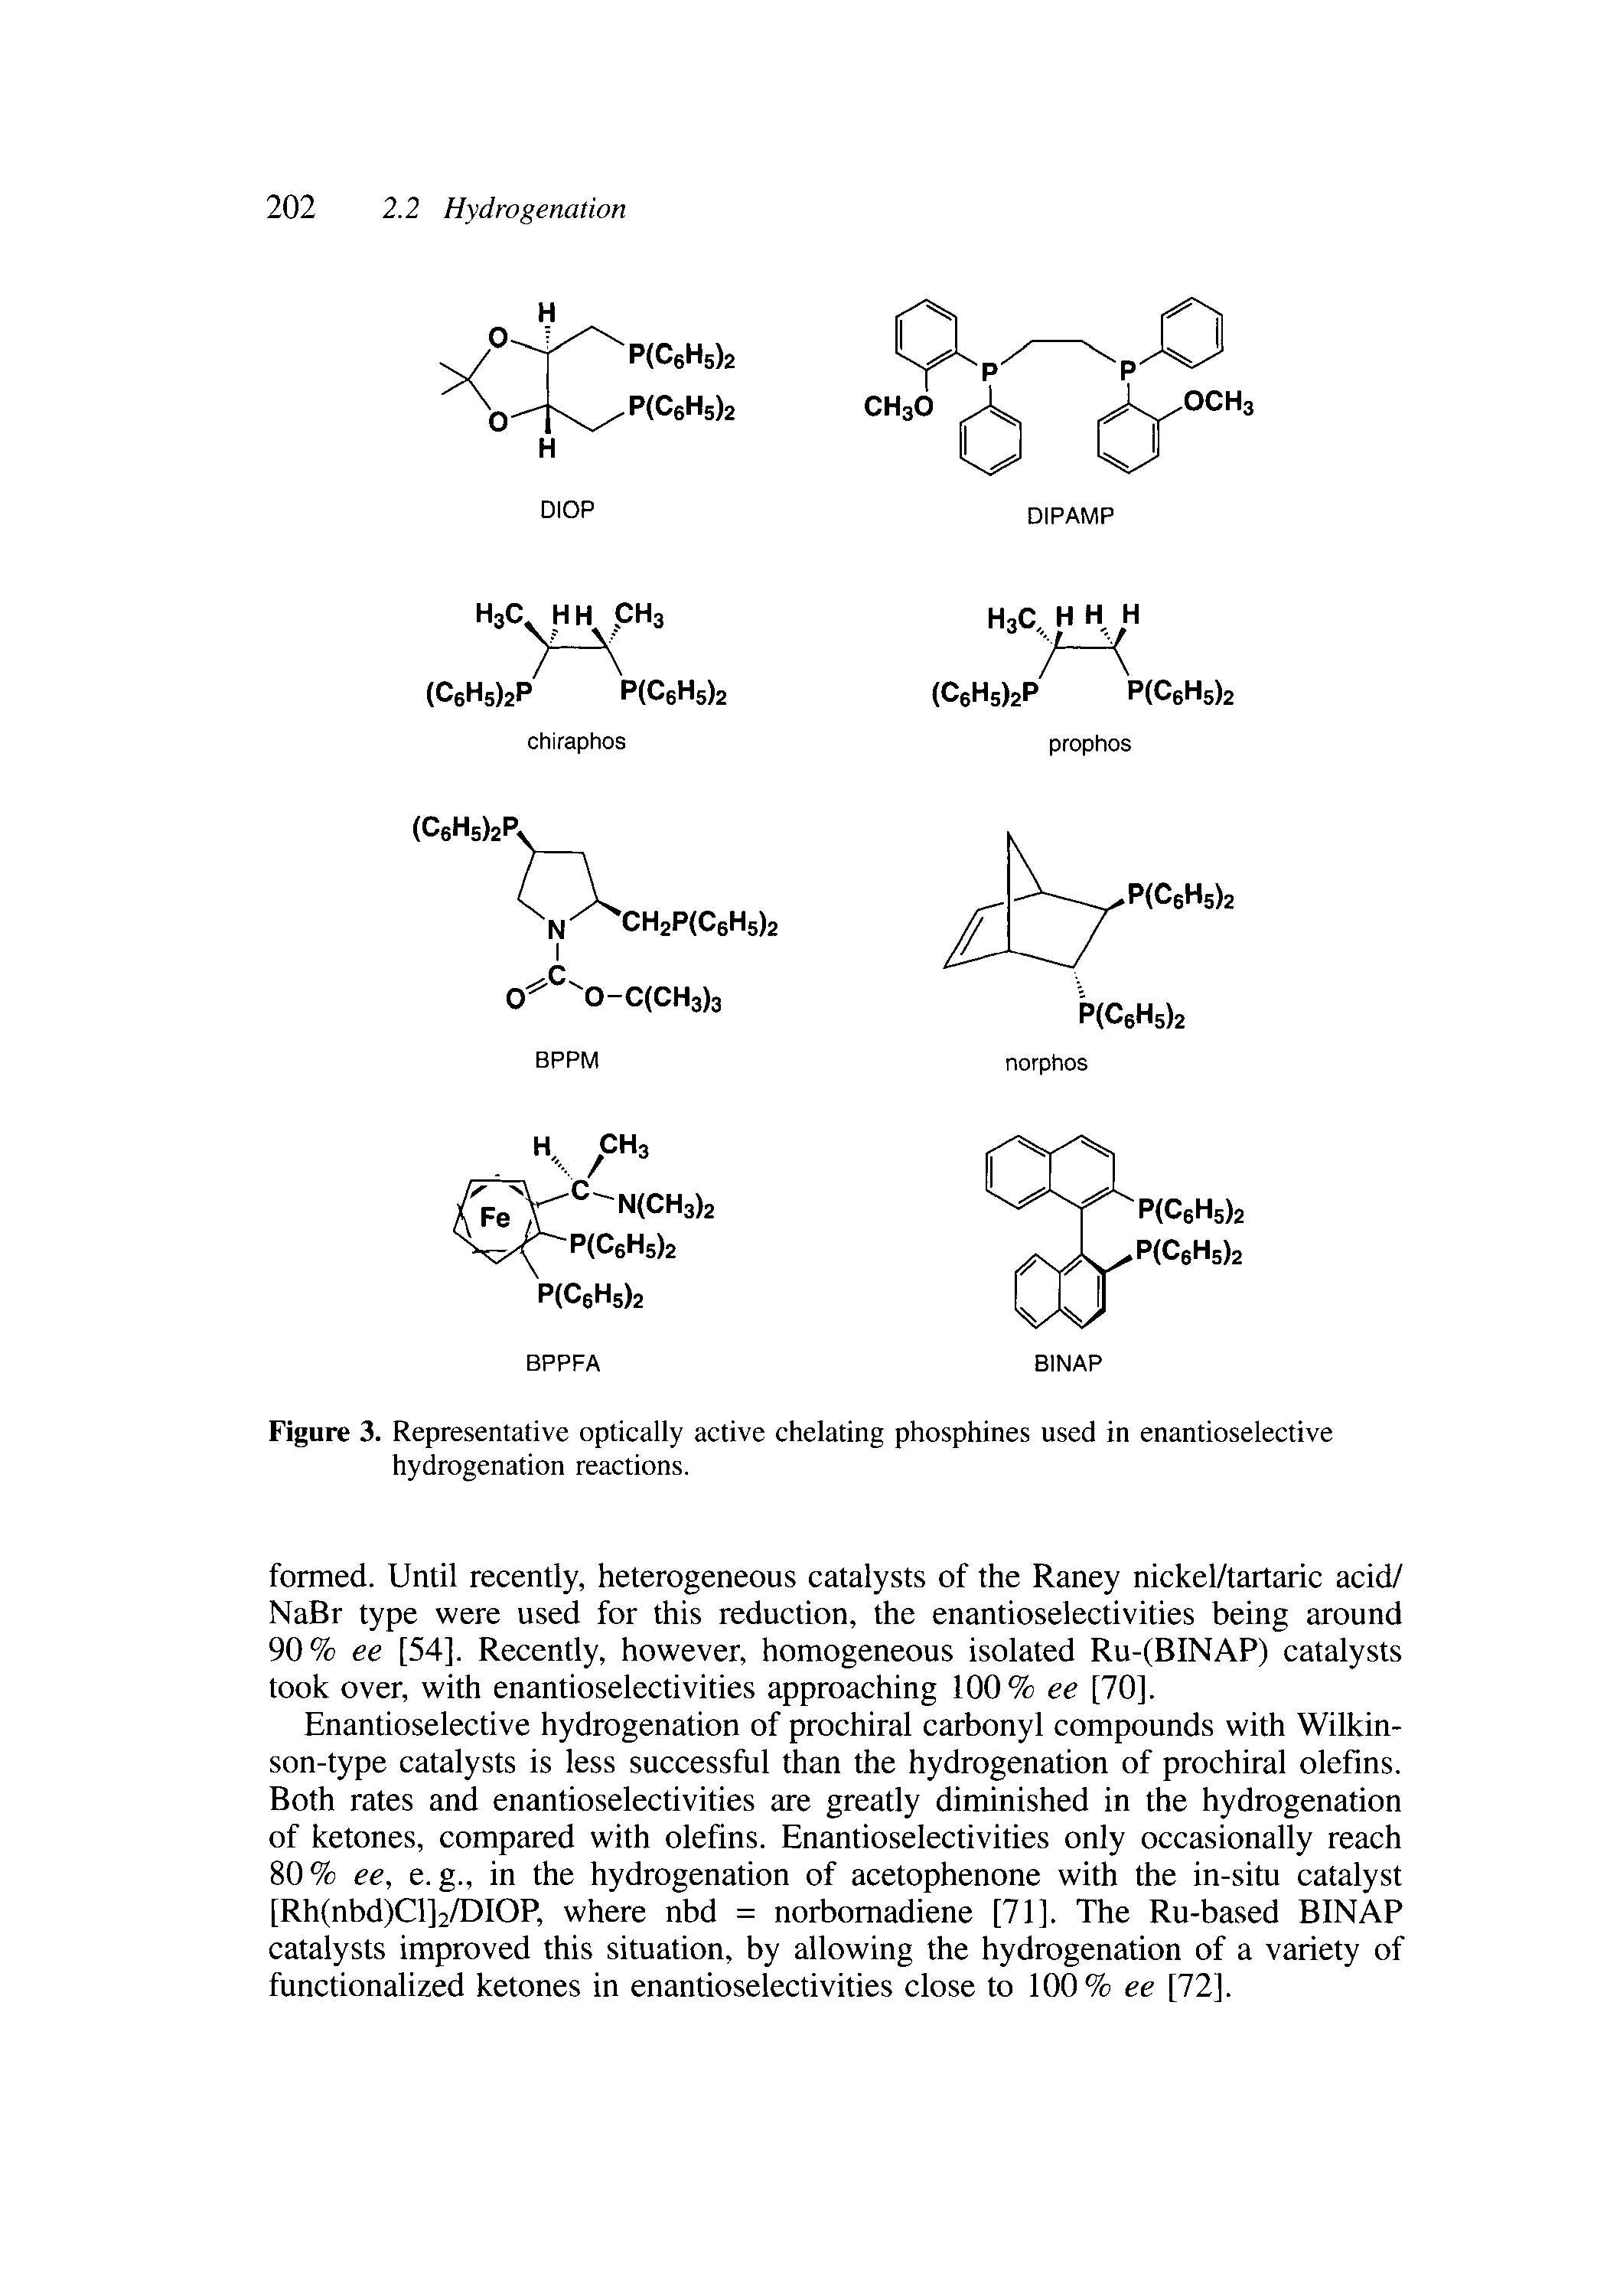 Figure 3. Representative optically active chelating phosphines used in enantioselective hydrogenation reactions.